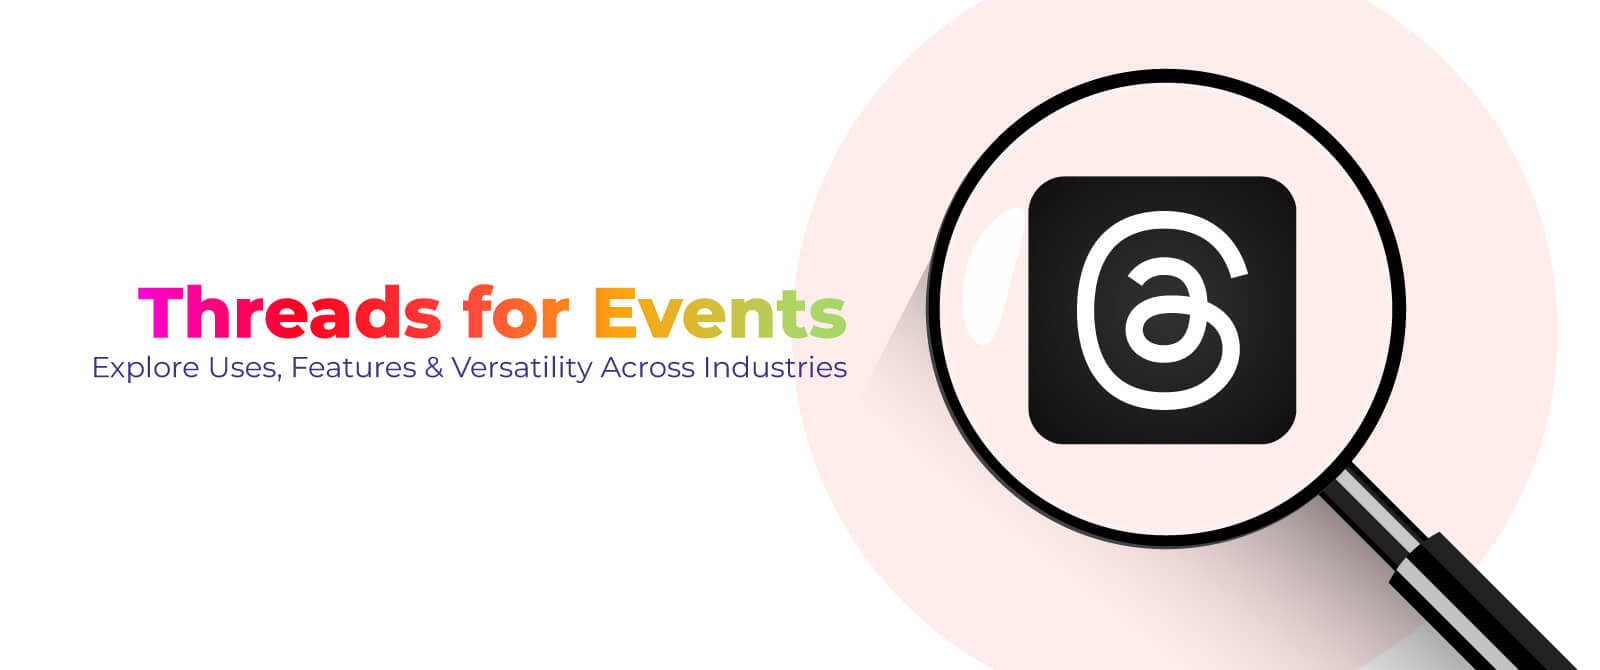 Threads for Events: Explore Uses, Features & Versatility Across Industries